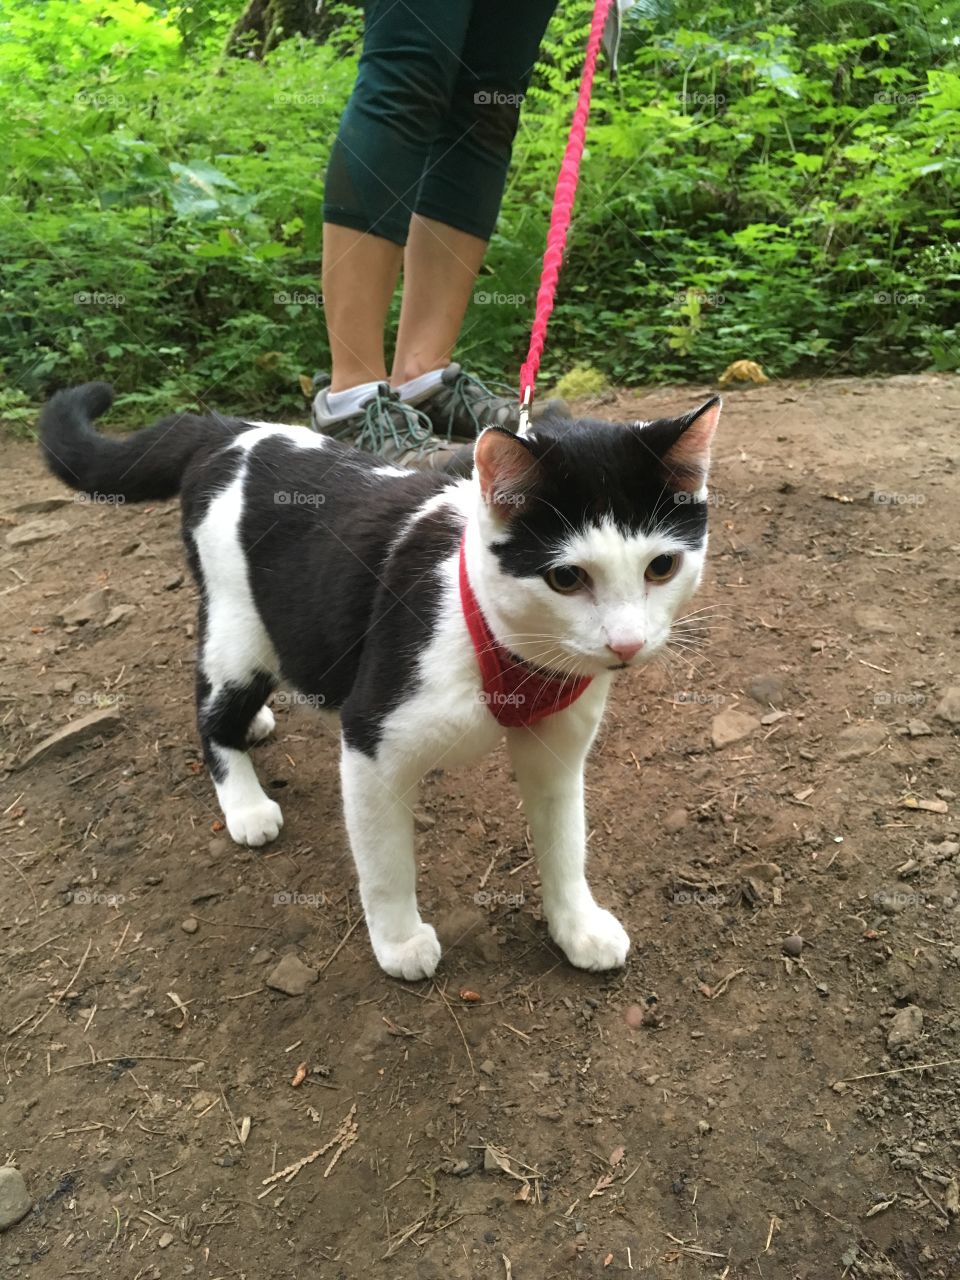 How many times do you see a cat on the trail? 